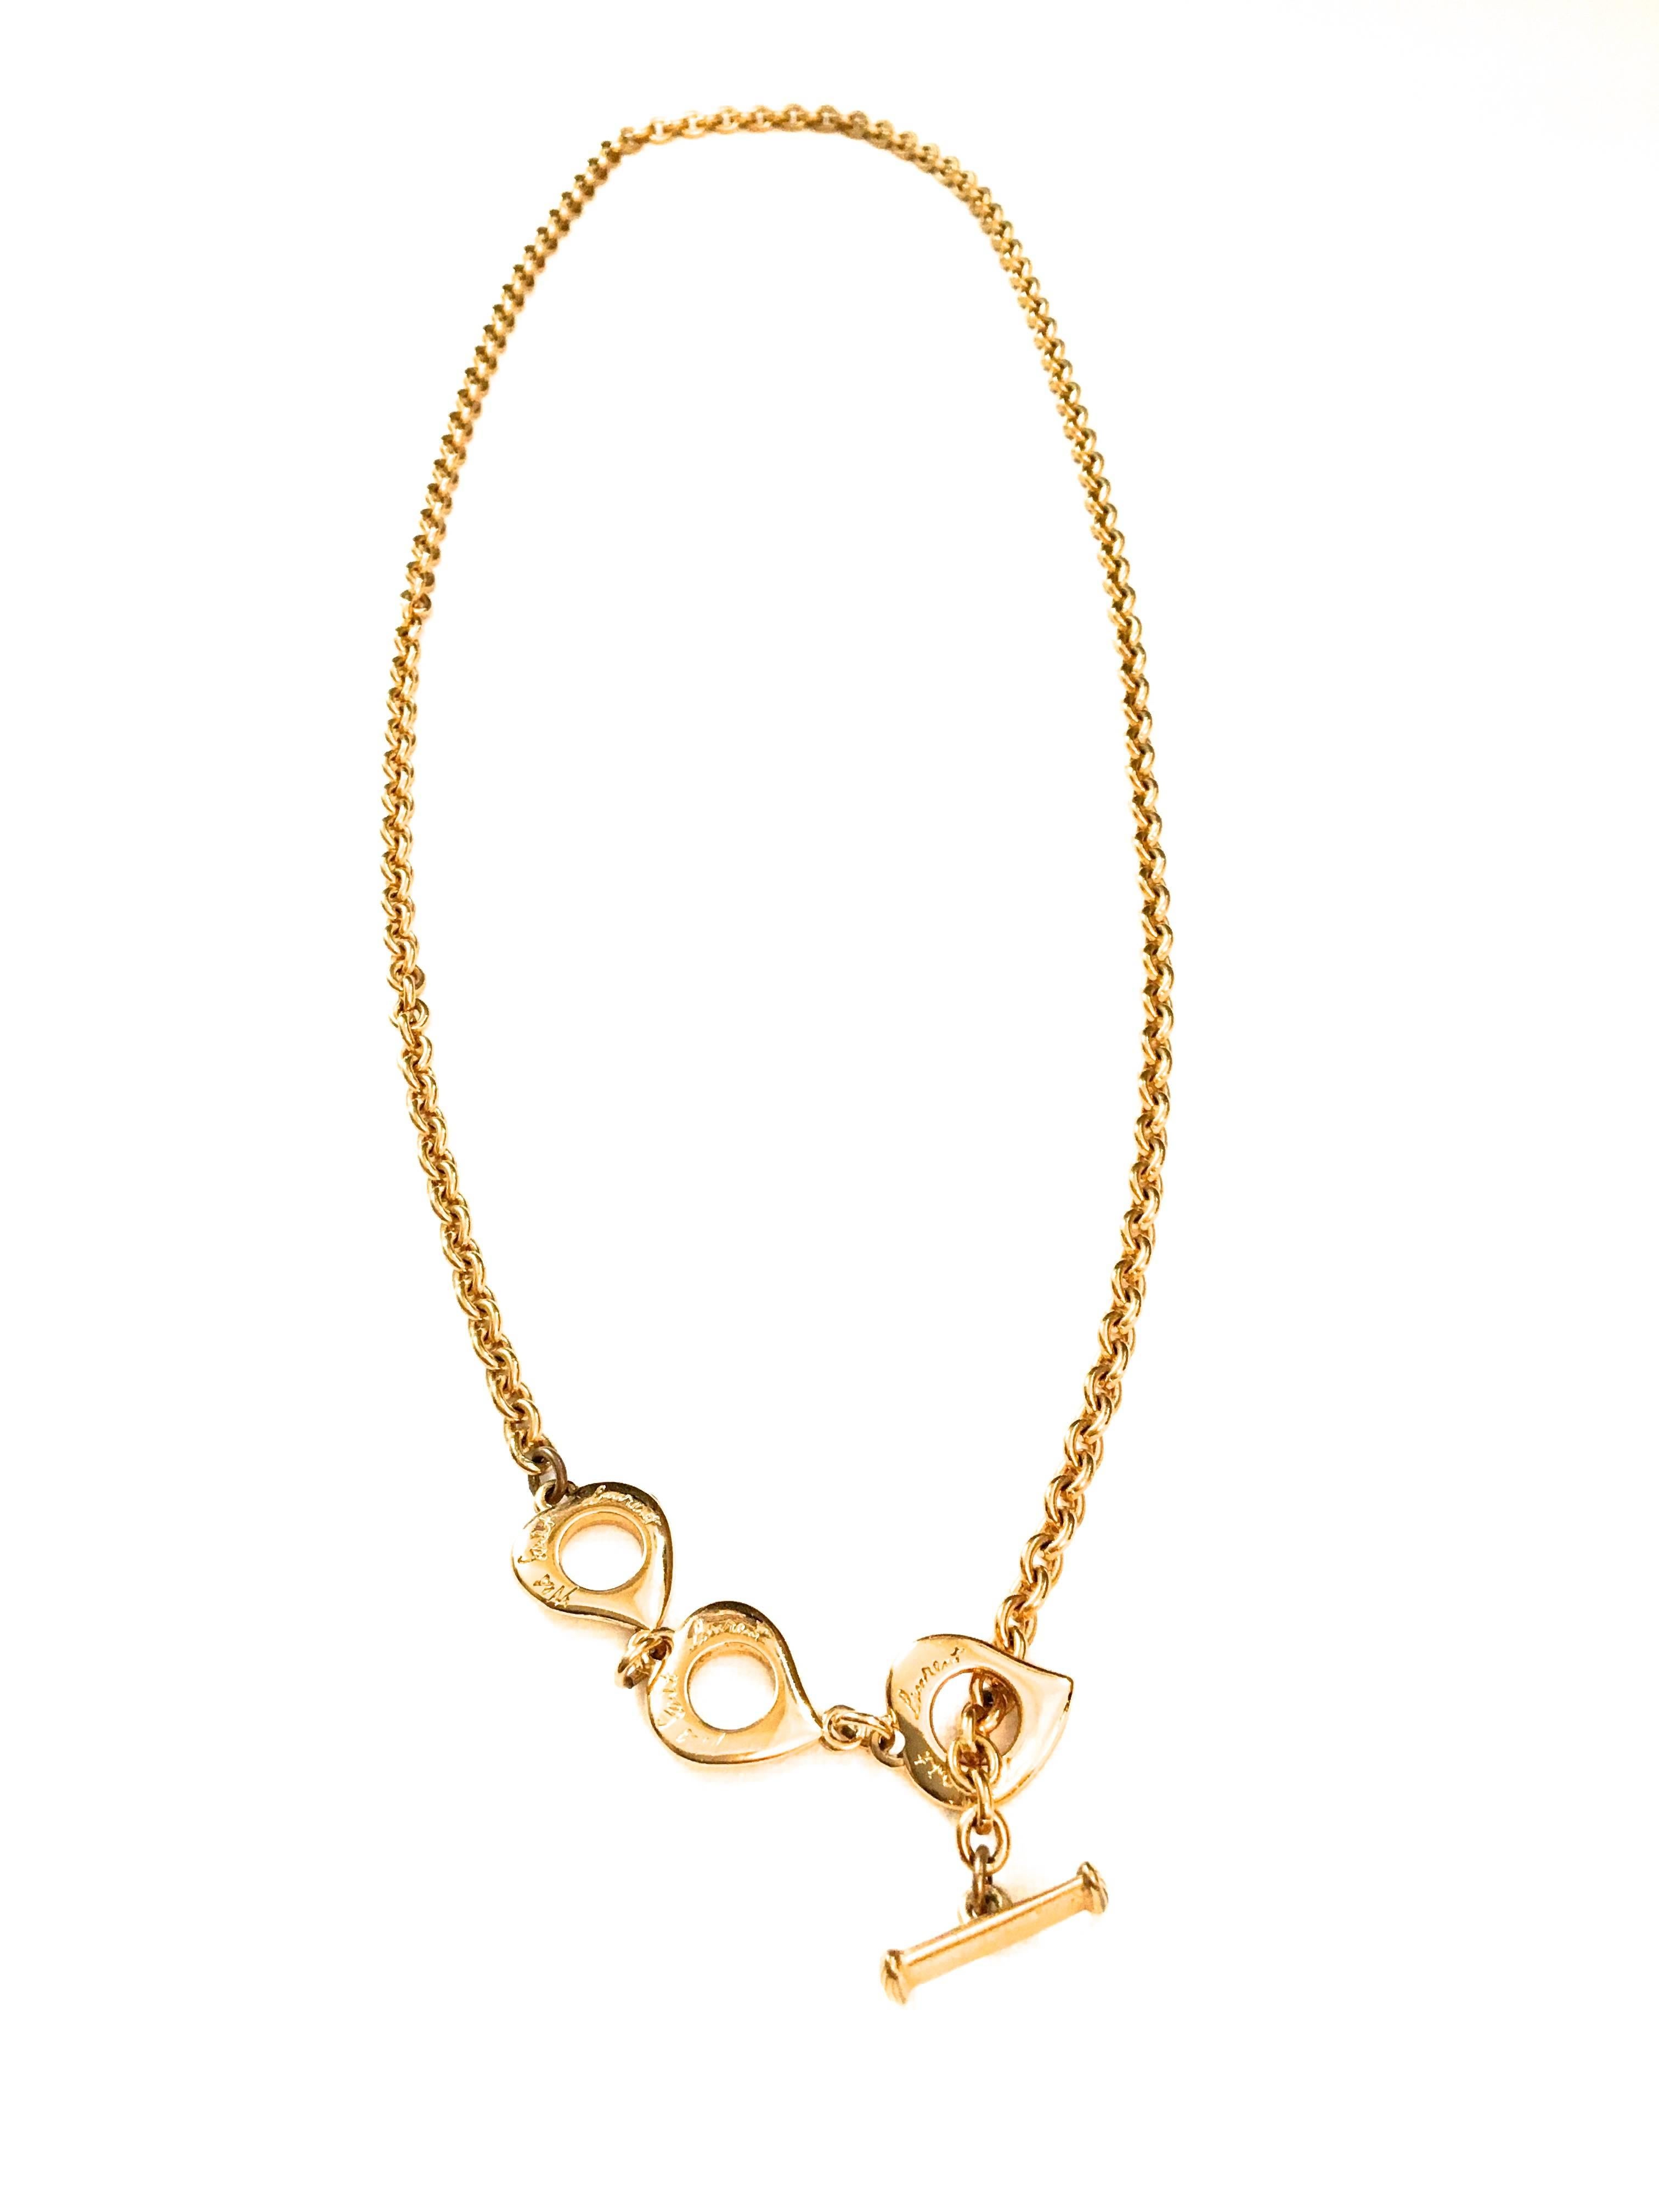 Presented here is a necklace from Yves Saint Laurent. This beautiful necklace is constructed using gold tone metal. The necklace is from the 1980's. The necklace is a gold tone chain with three abstract heart shaped charms connected to the necklace.